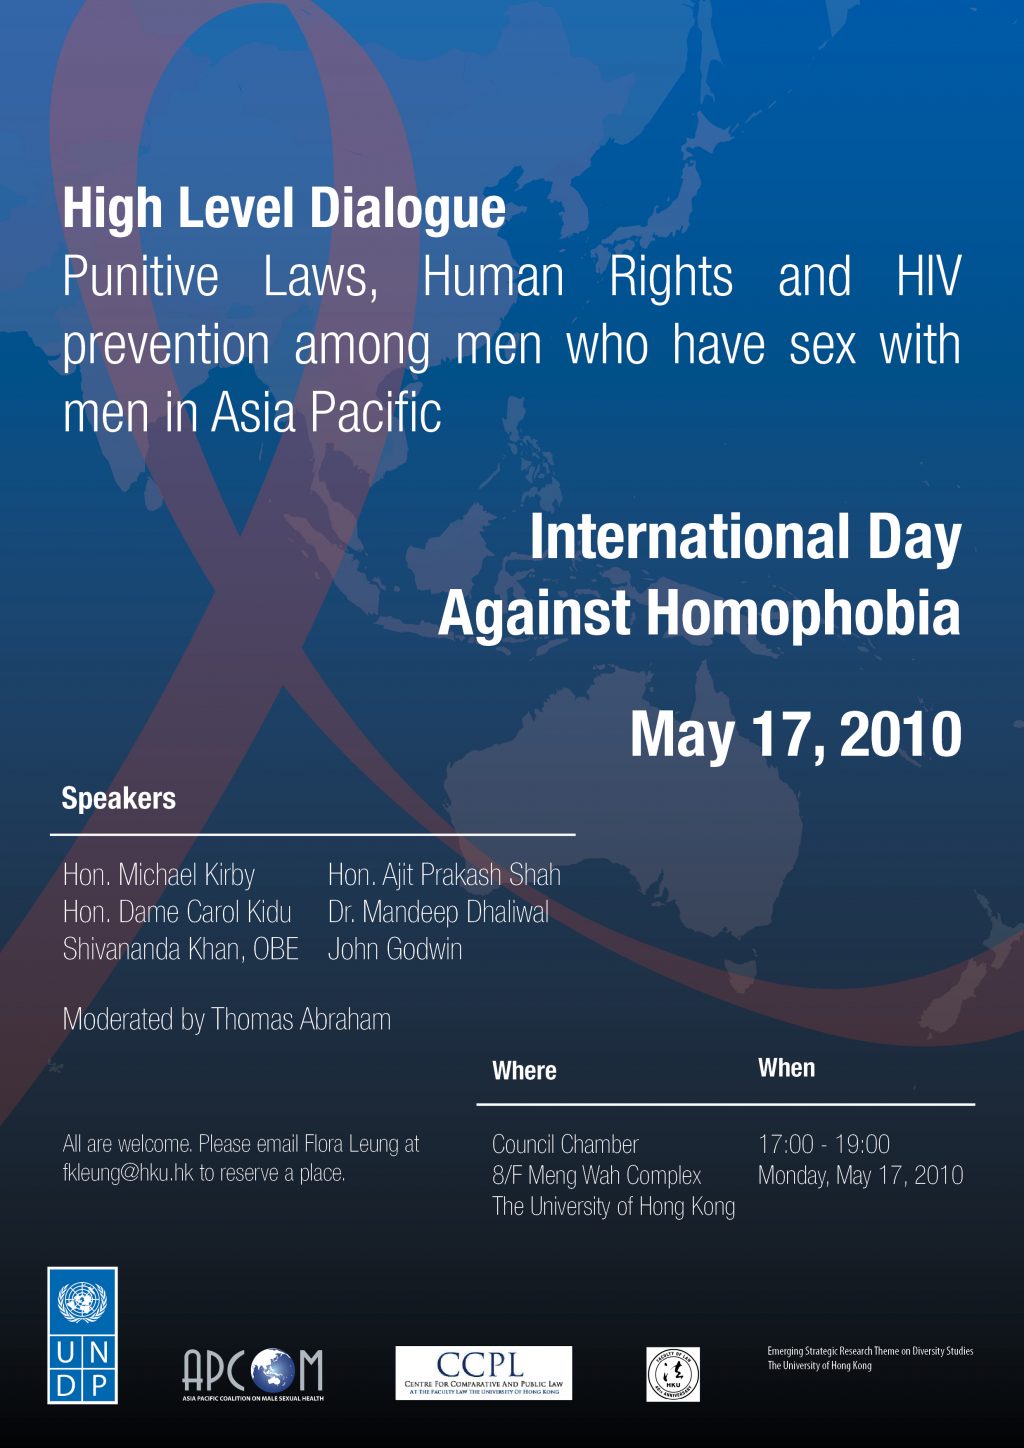 High Level Dialogue: Punitive Laws, Human Rights and HIV prevention among men who have sex with men in Asia Pacific